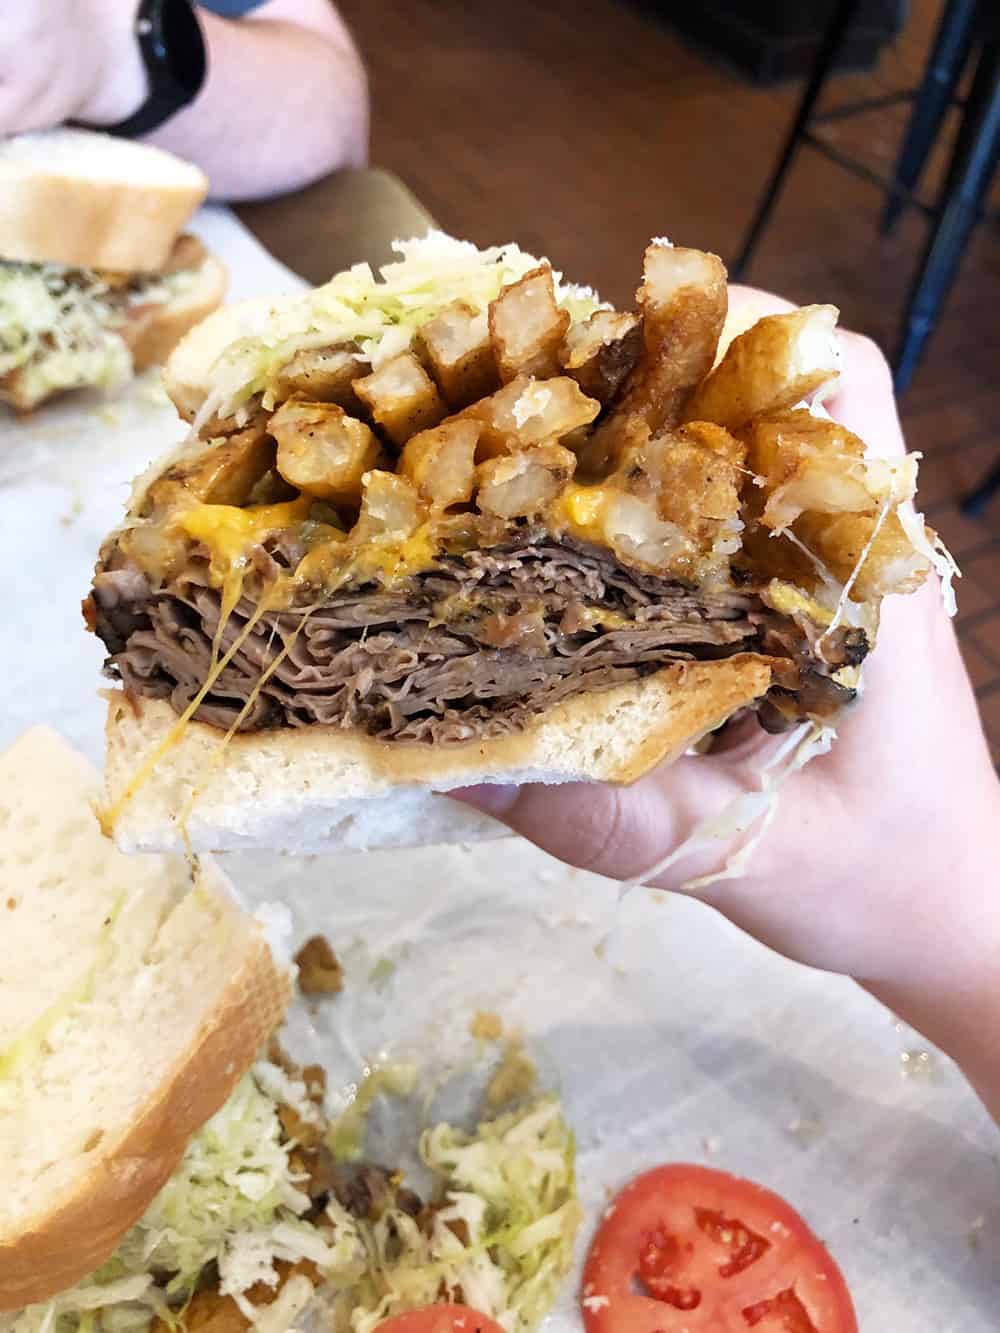 The Primanti Brothers sandiwch includes french fries included. The sandwich and restaurant date back to the Great Depression and the sandwiches were created so workers could take their whole meal without risk of spilling it on themselves. | affordable family day trip + places to visit in Pittsburgh, Pennsylvania via Autumn All Along